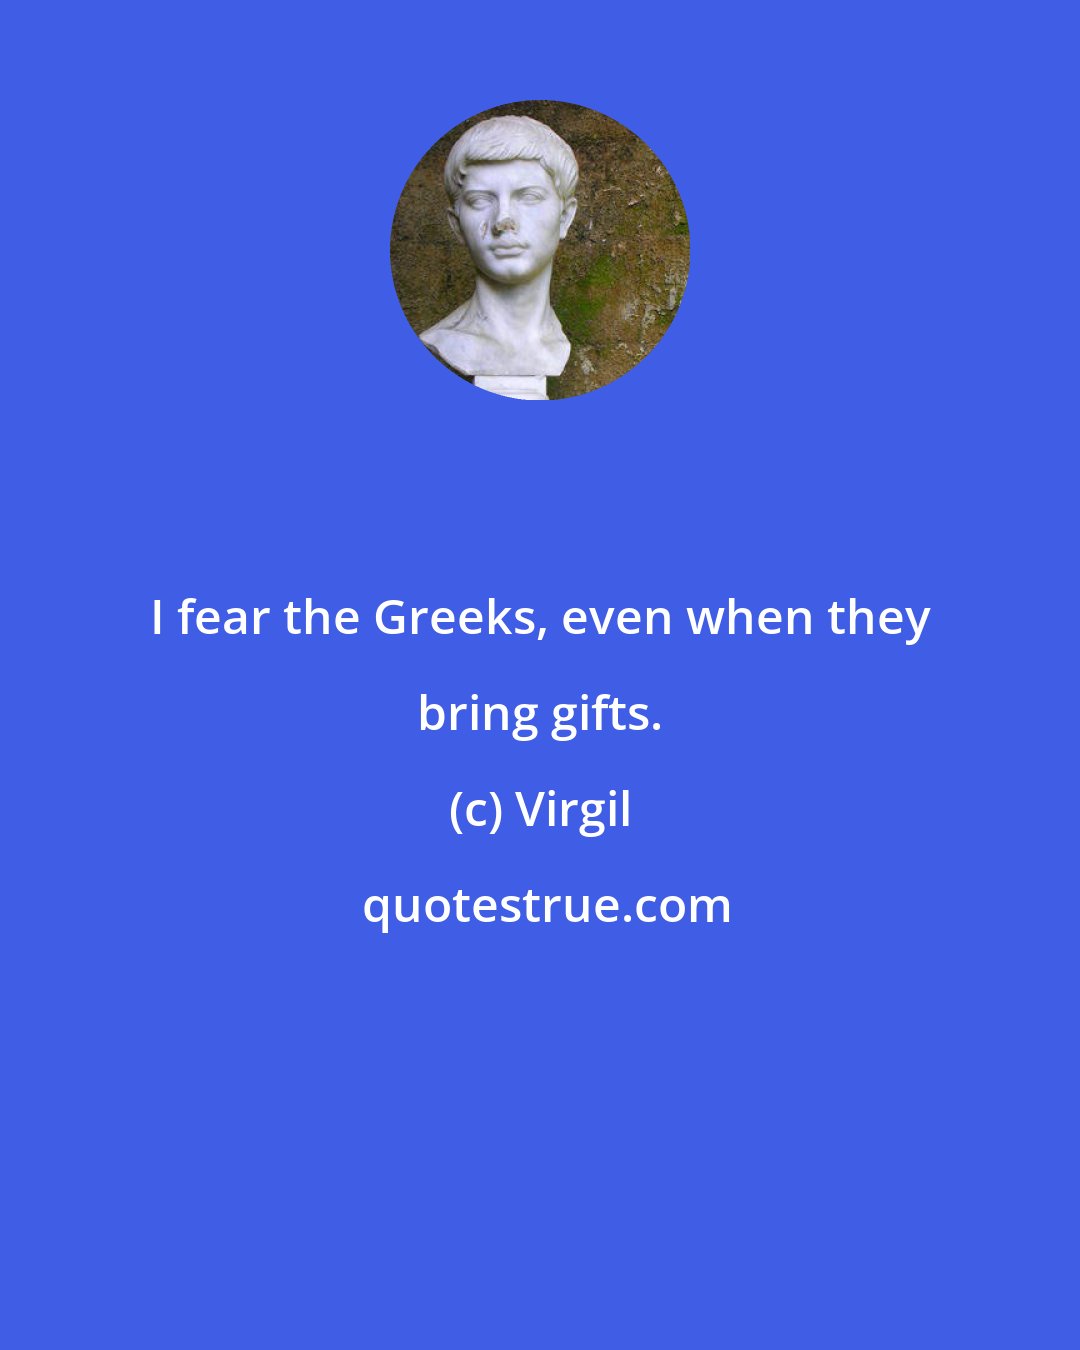 Virgil: I fear the Greeks, even when they bring gifts.